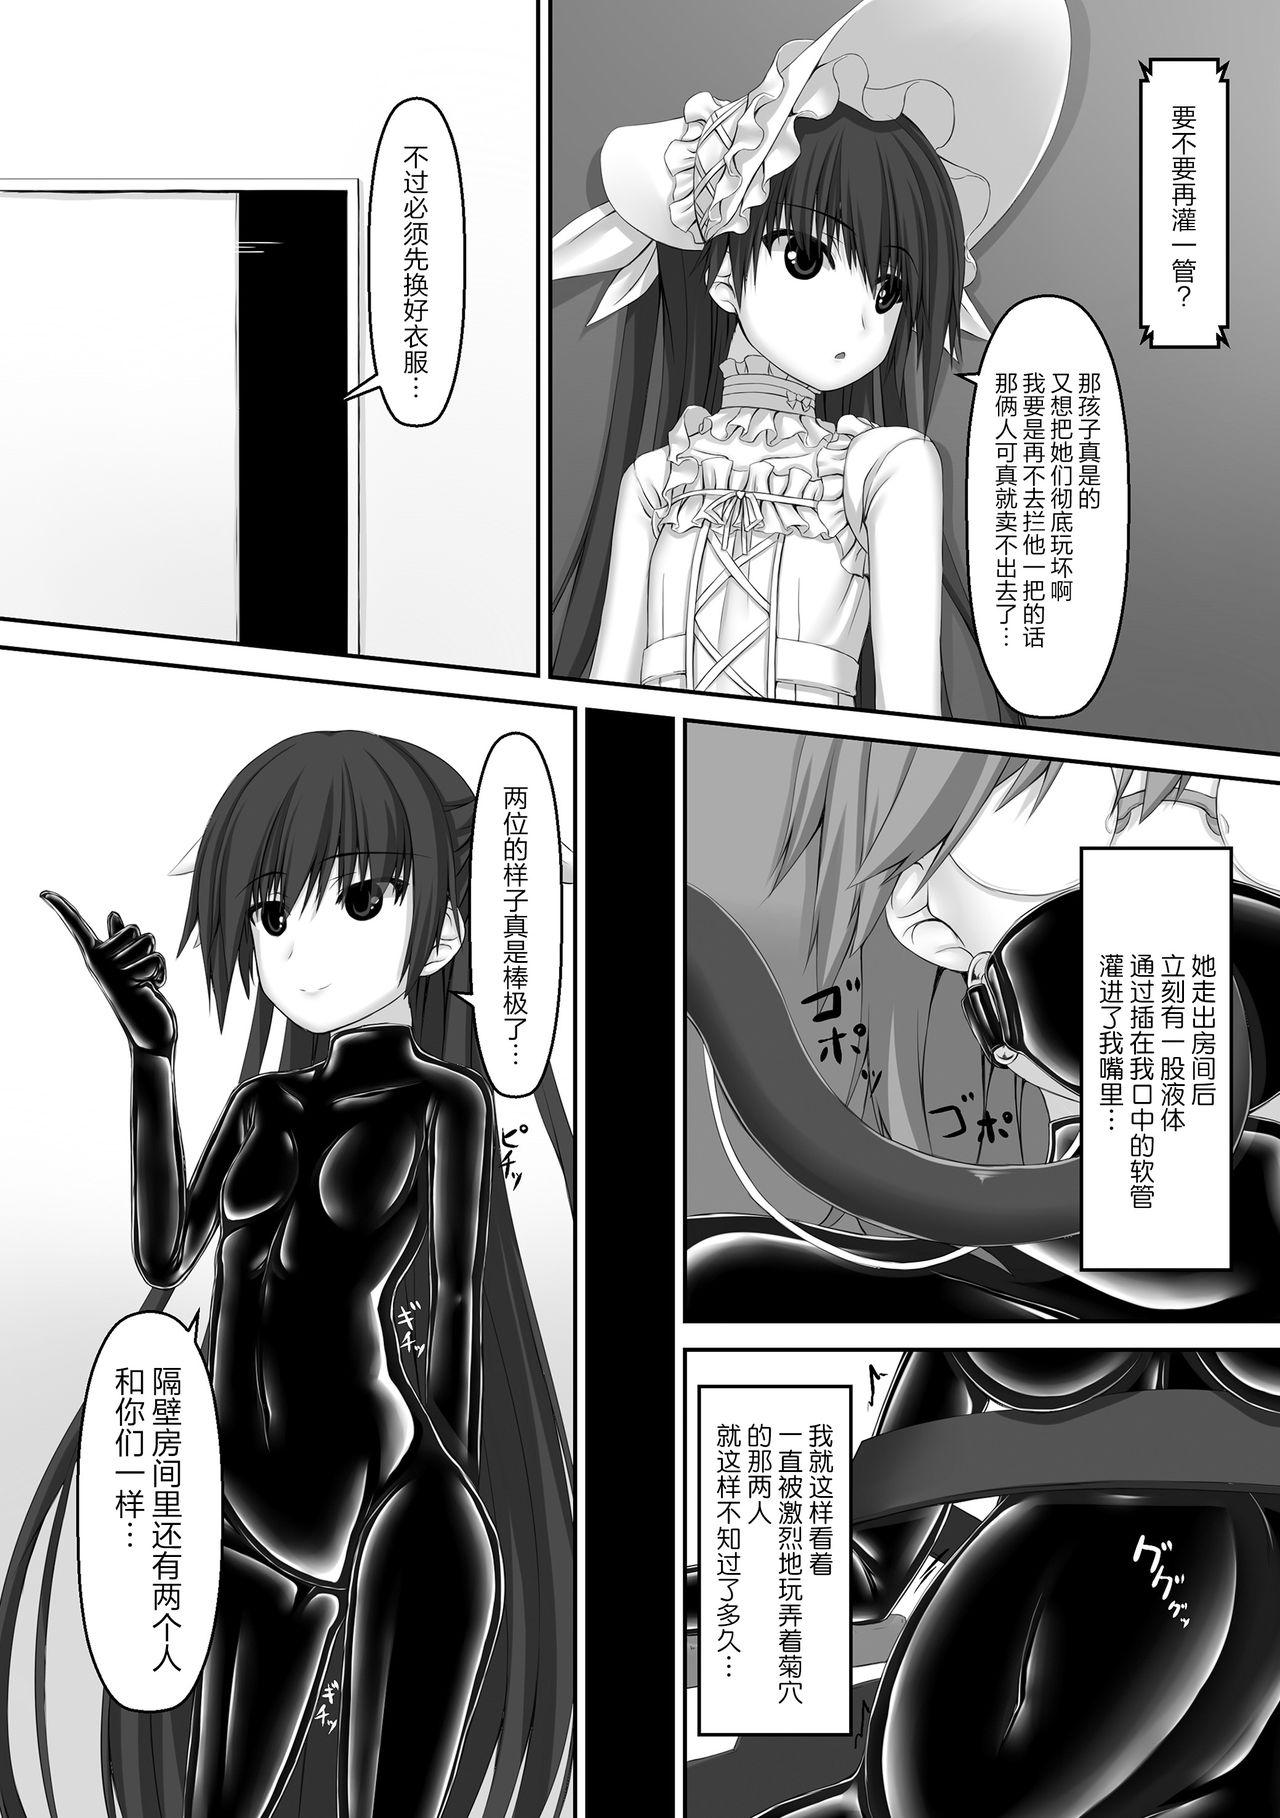 Solo Girl Beginning black5 - Original Chacal - Page 10